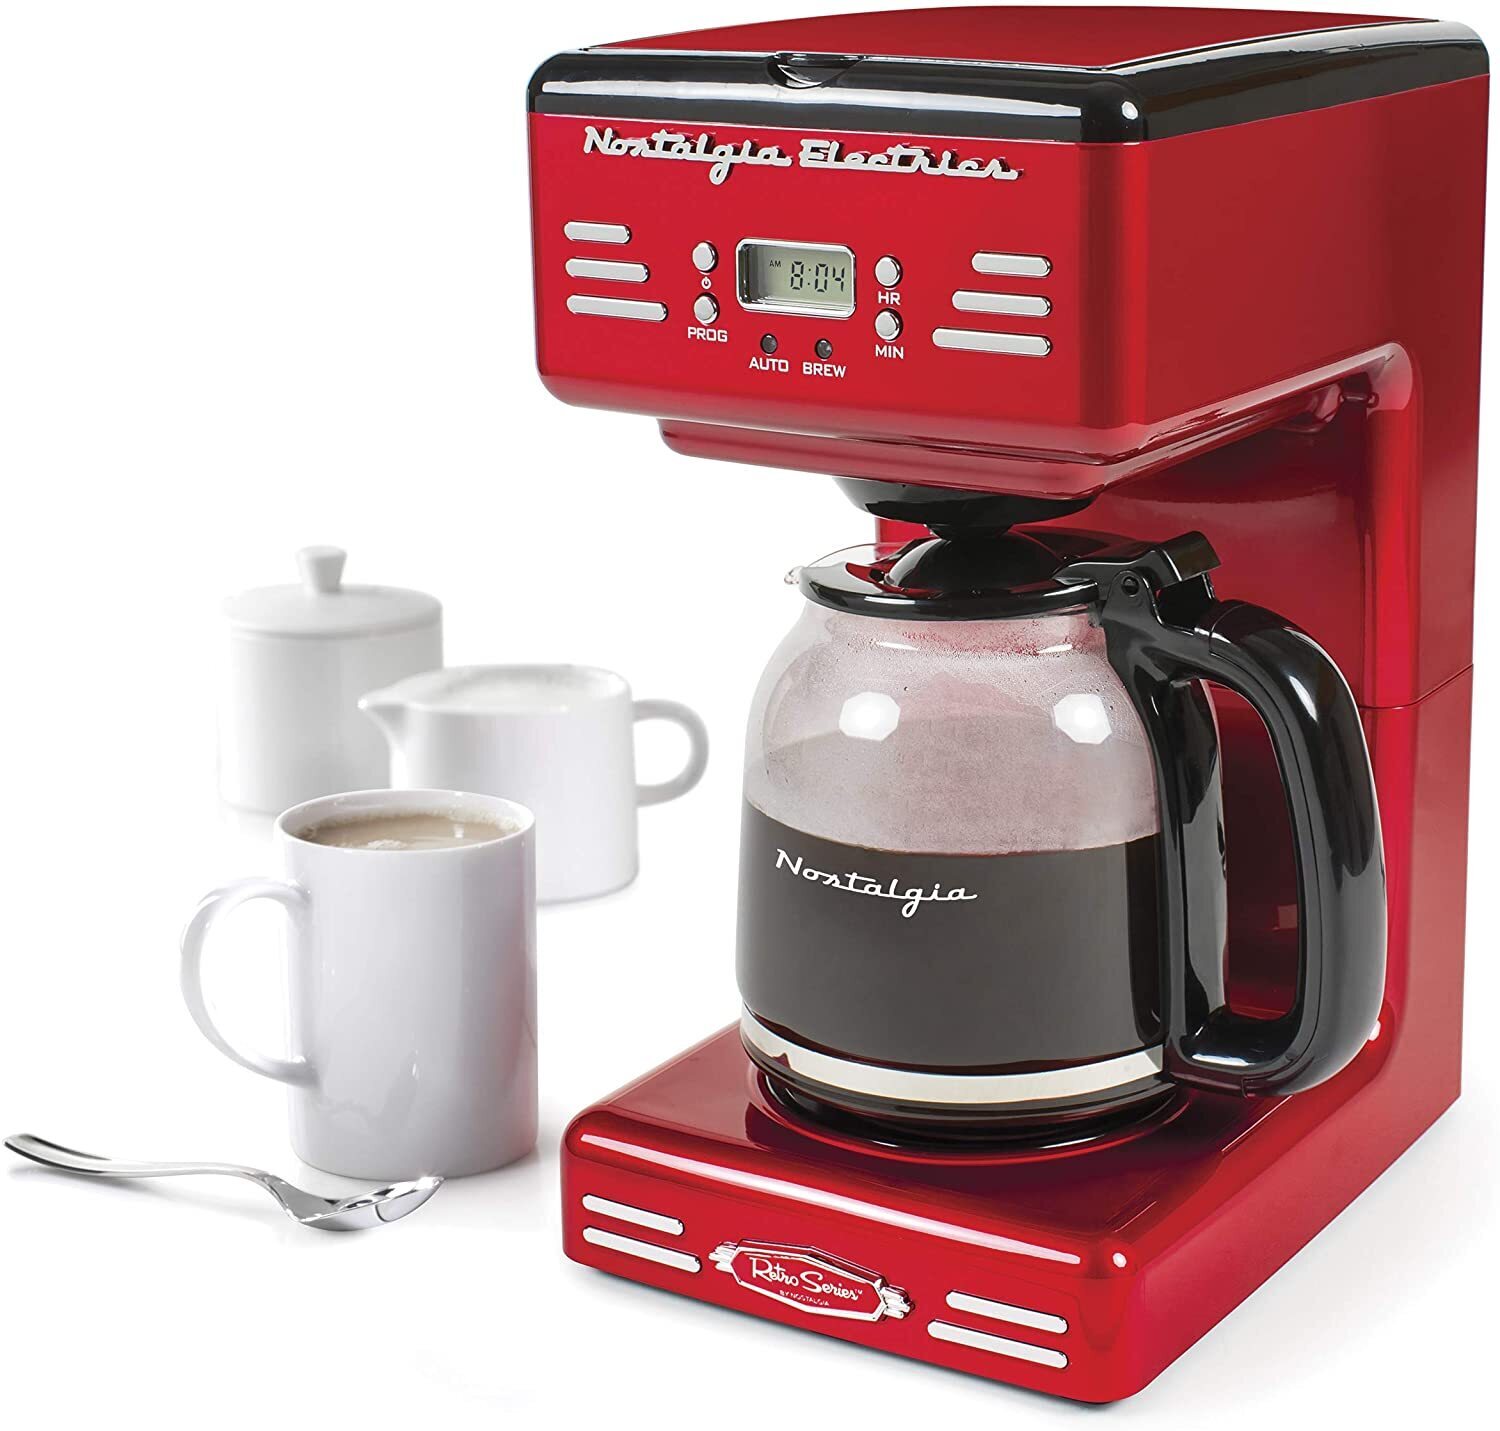 Programmable Candy Red Retro Coffee Maker